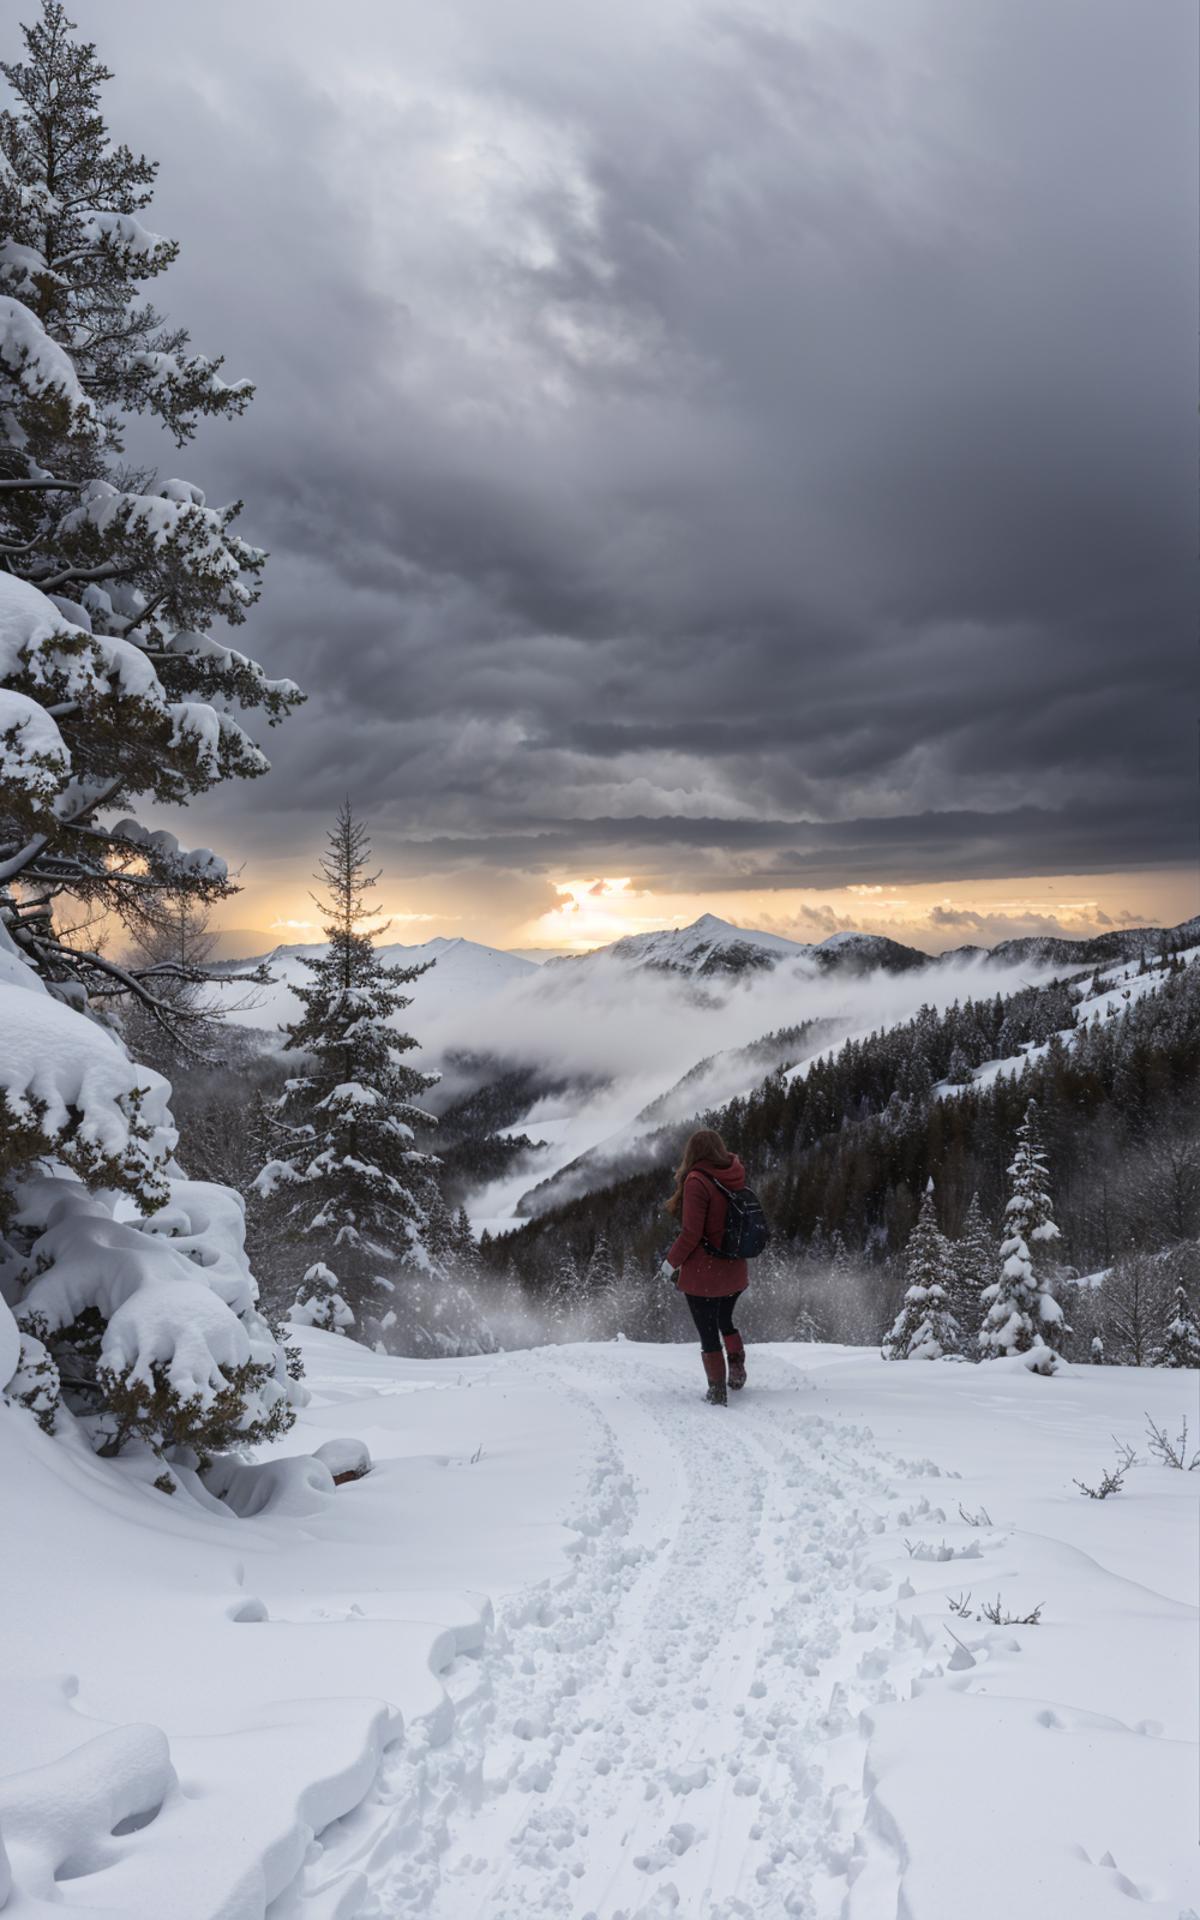 A woman hiking in snowy mountains with a backpack on.